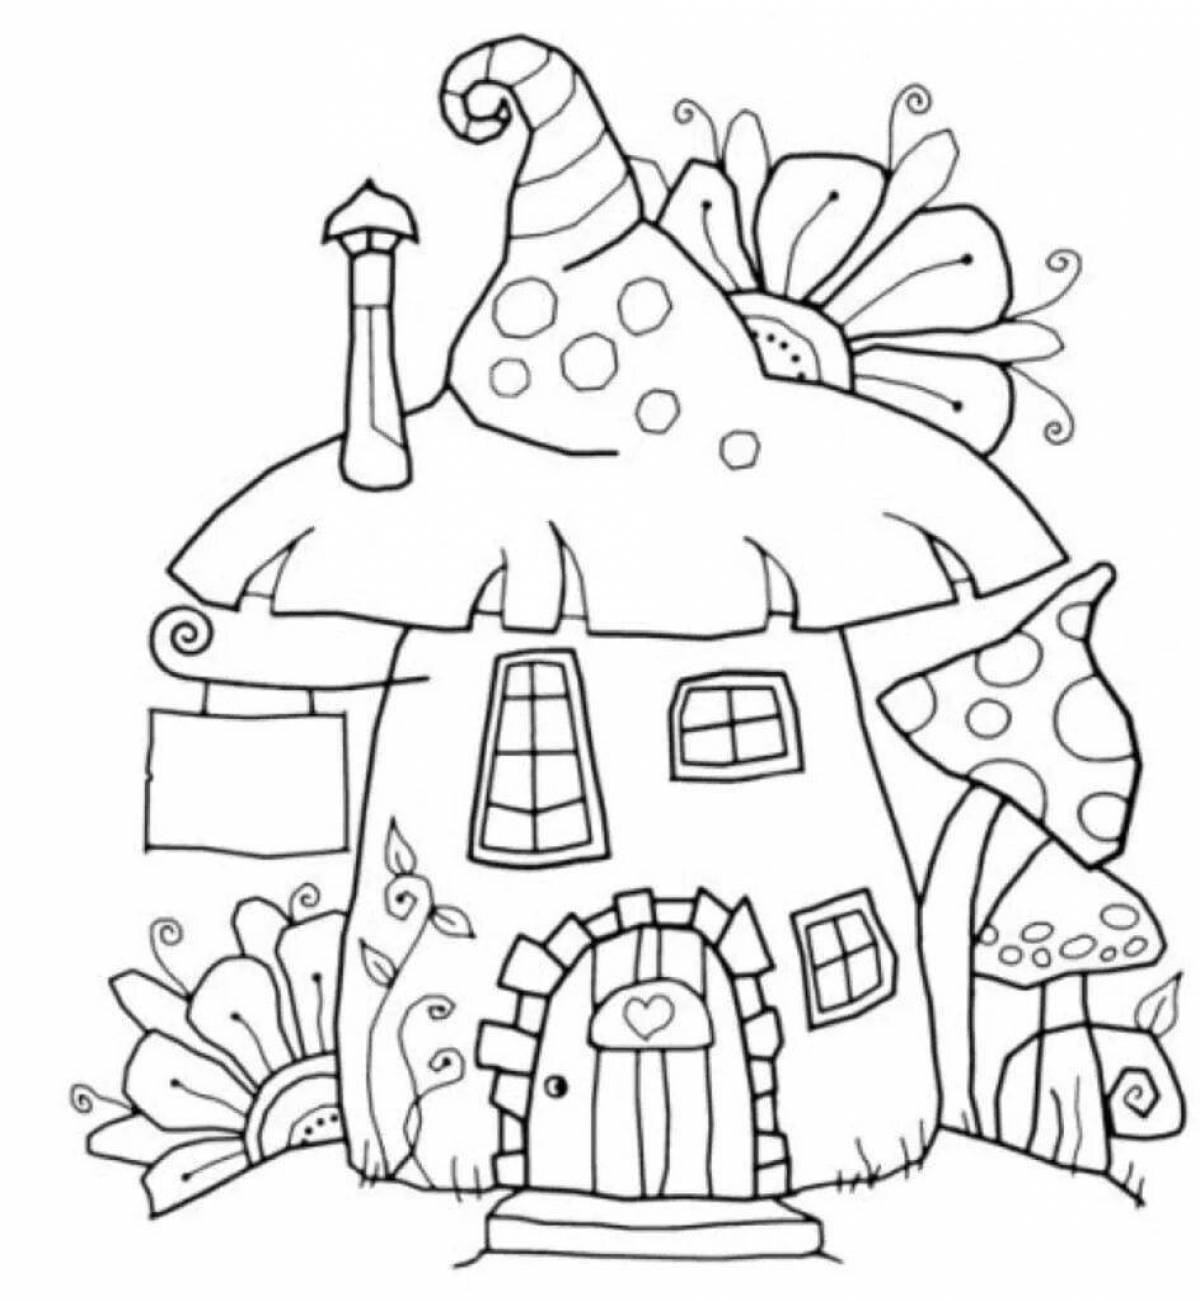 Magic house glowing coloring book